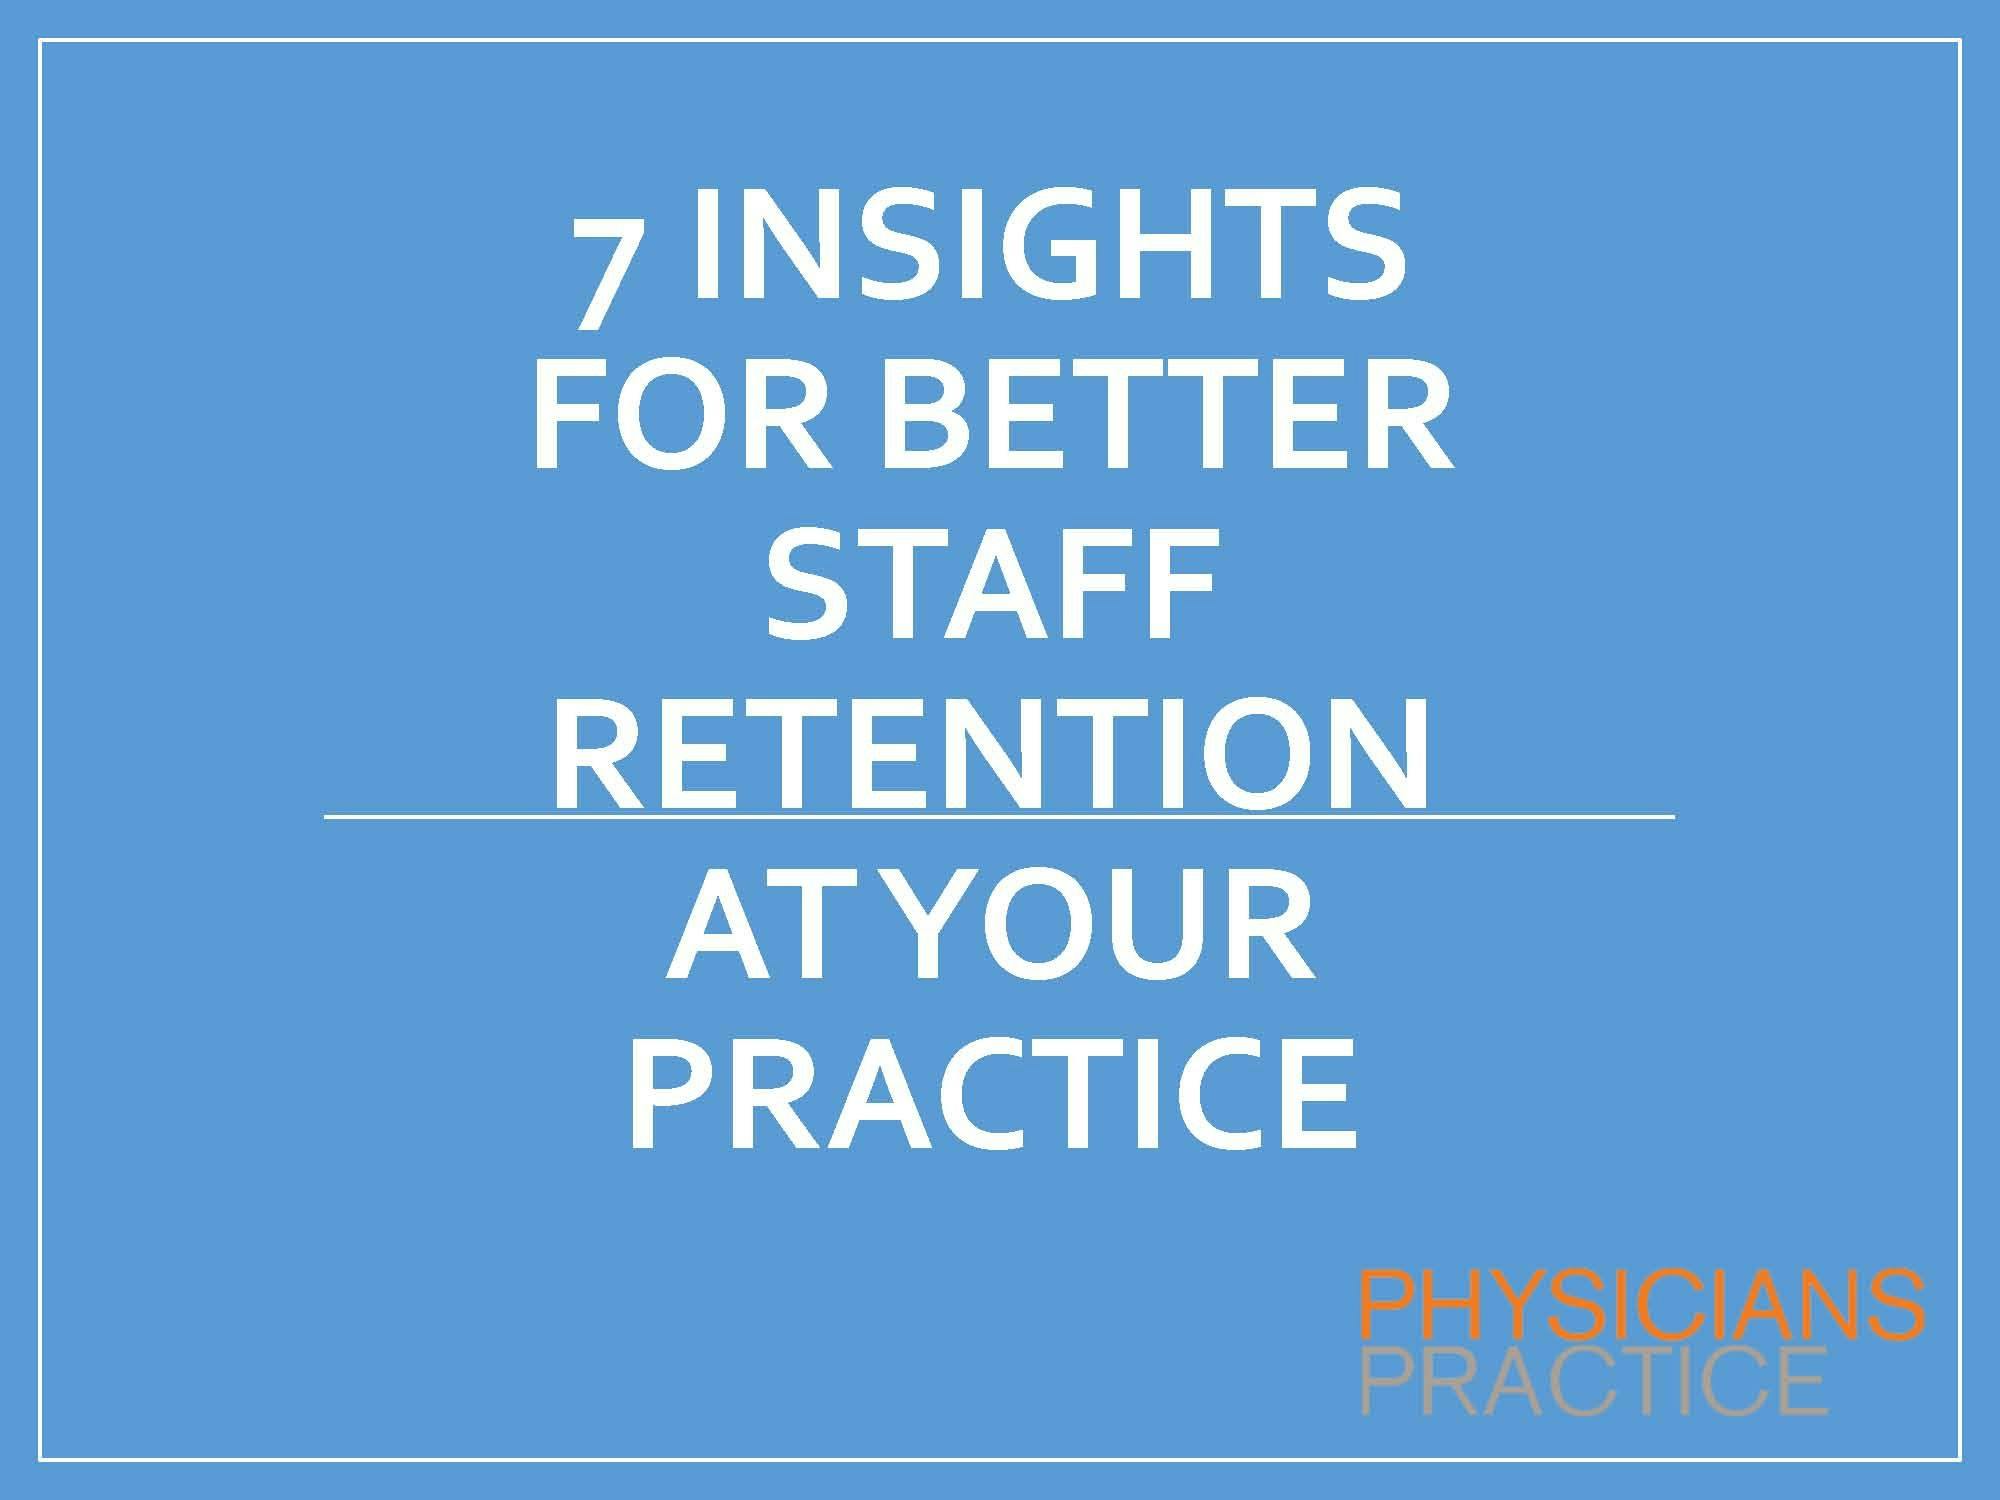 Insights for Better Staff Retention at Your Practice